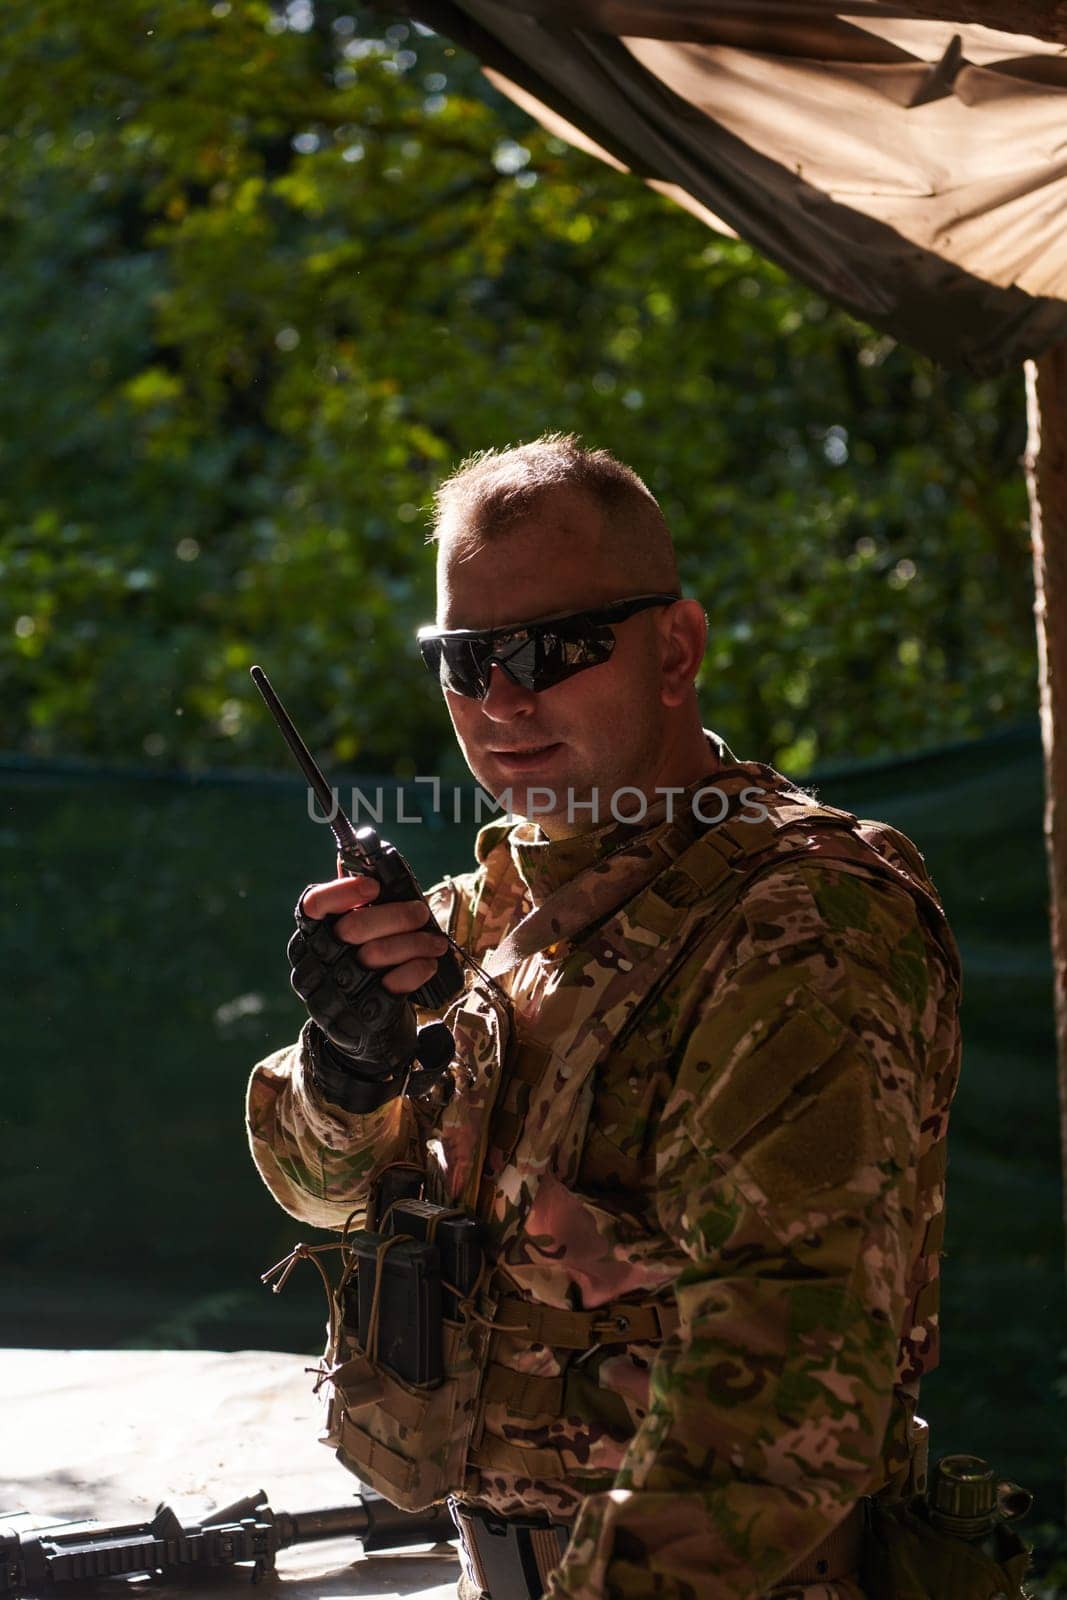 A military major employs a Motorola radio for seamless communication with his fellow soldiers during a tactical operation, showcasing professionalism and strategic coordination by dotshock